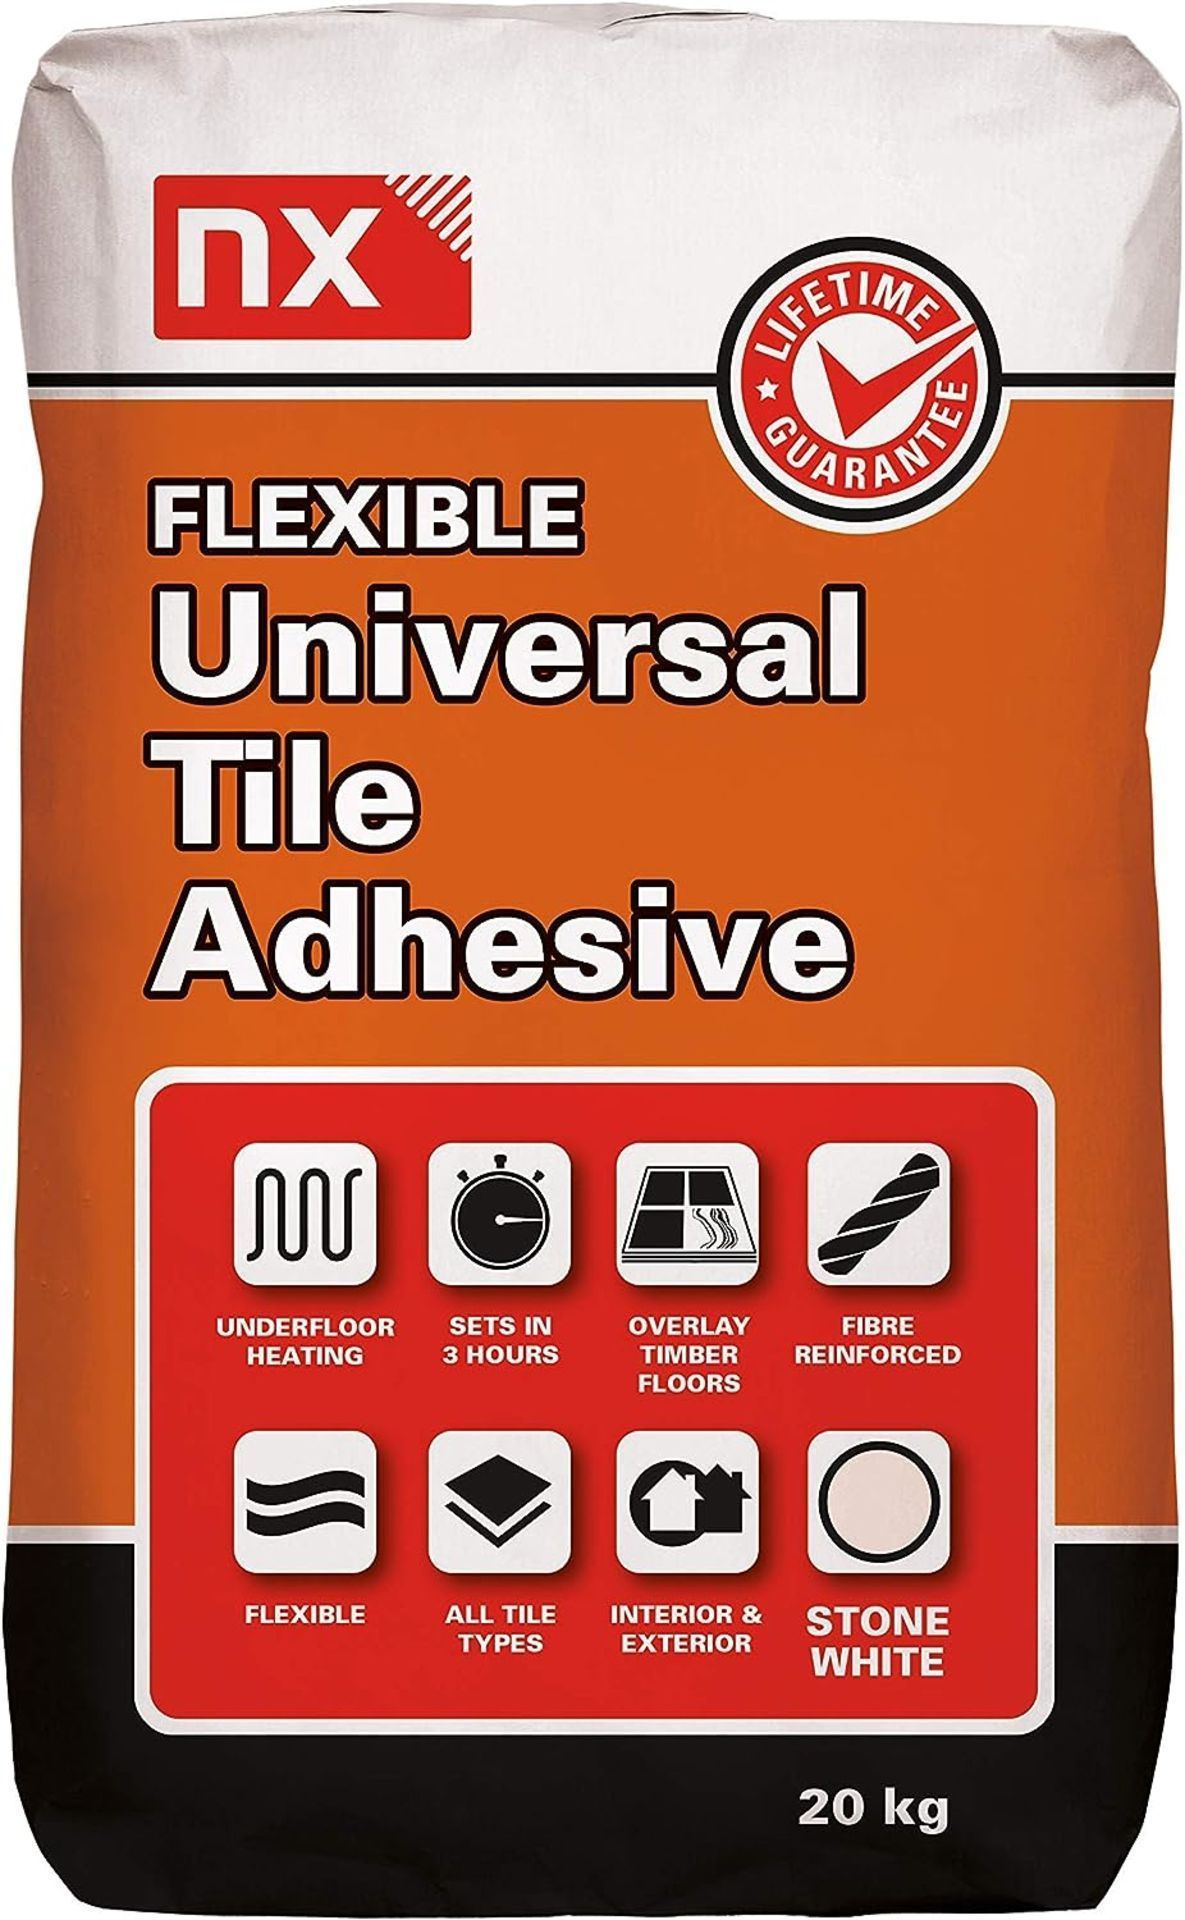 10 X 10KG BAGS OF NX FLEXIBLE UNIVERSALE TILE ADHESIVE. STONE WHITE. UNDERFLOOR HEATING. SETS IN 3